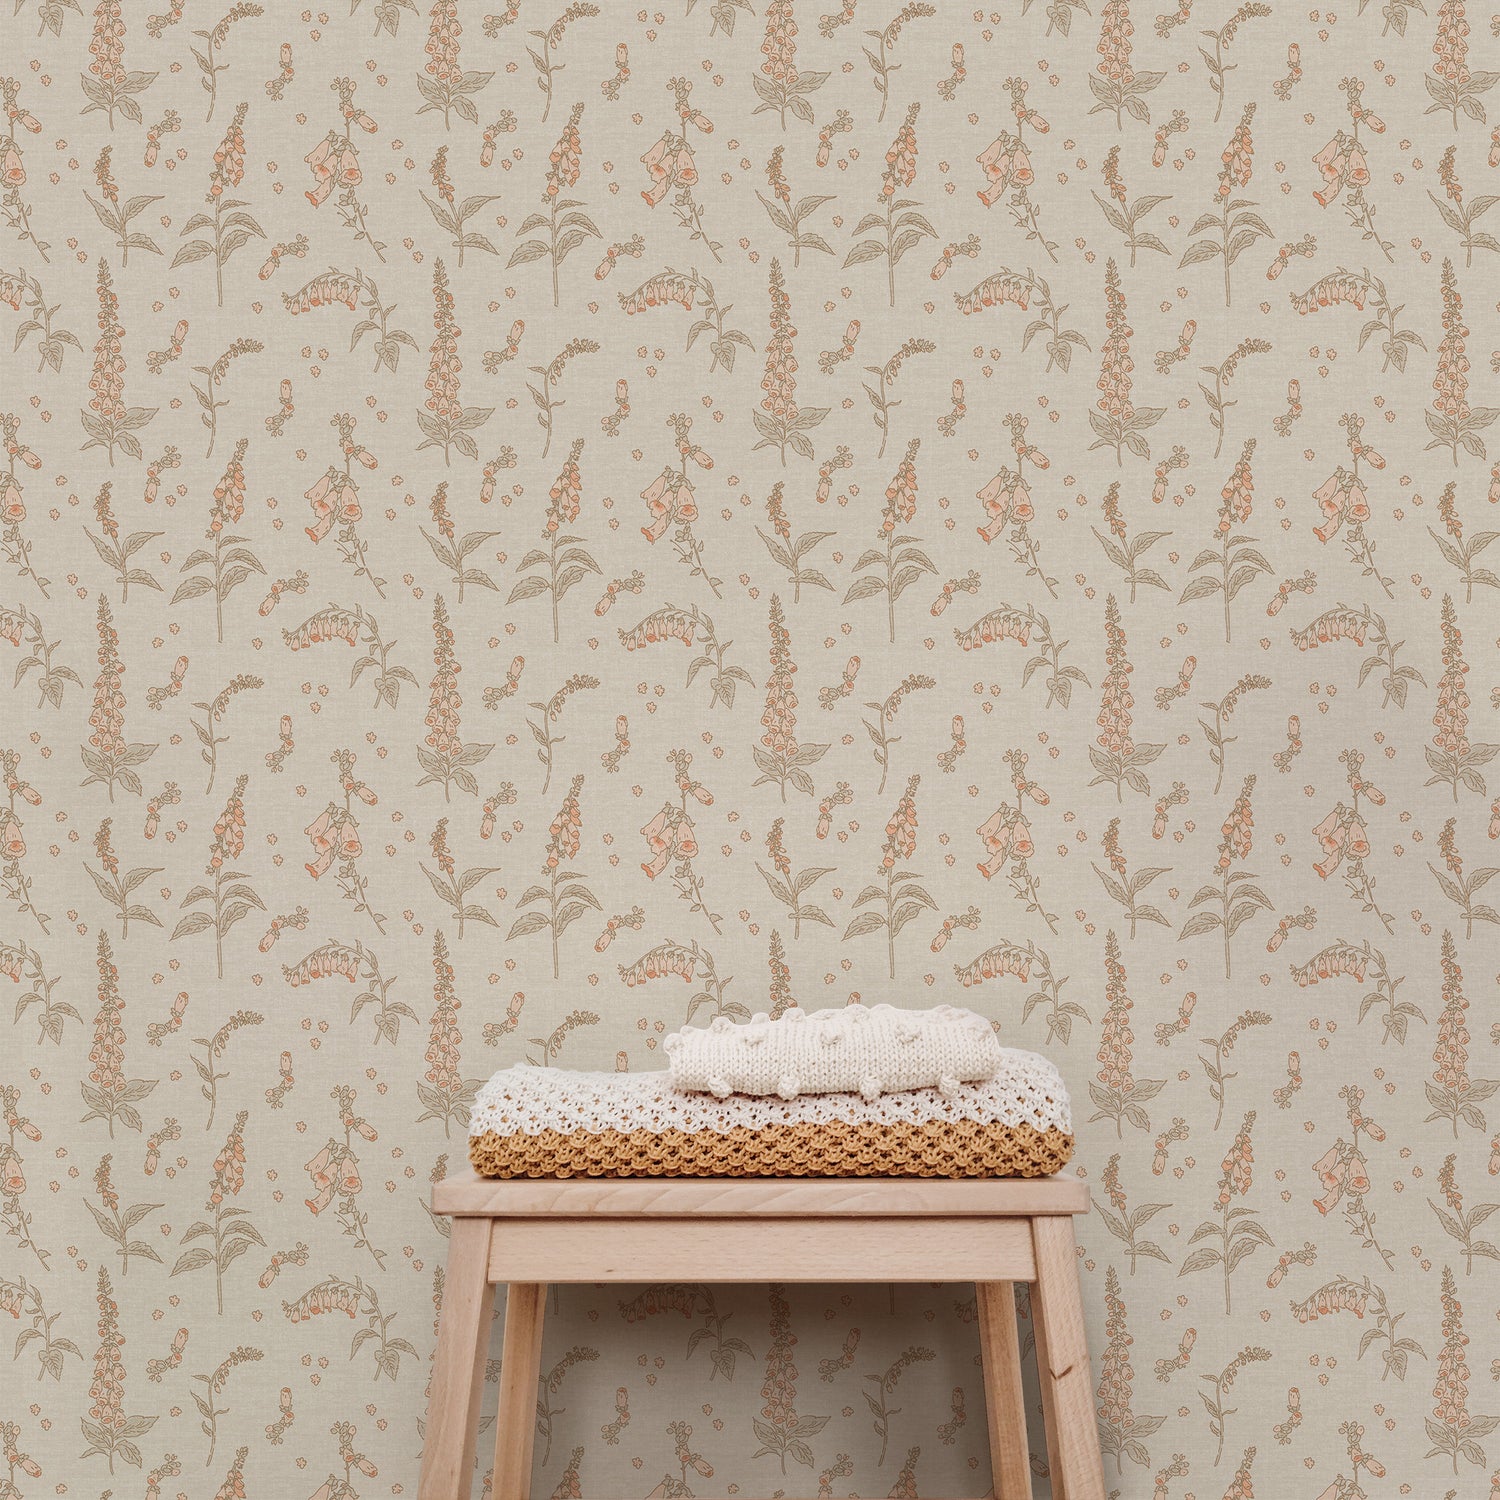 Enliven the spirit of any space with this gorgeous Foxgloves Wallpaper - Tan! Its delicate botanical design will bring a touch of feminine charm & character to your walls.